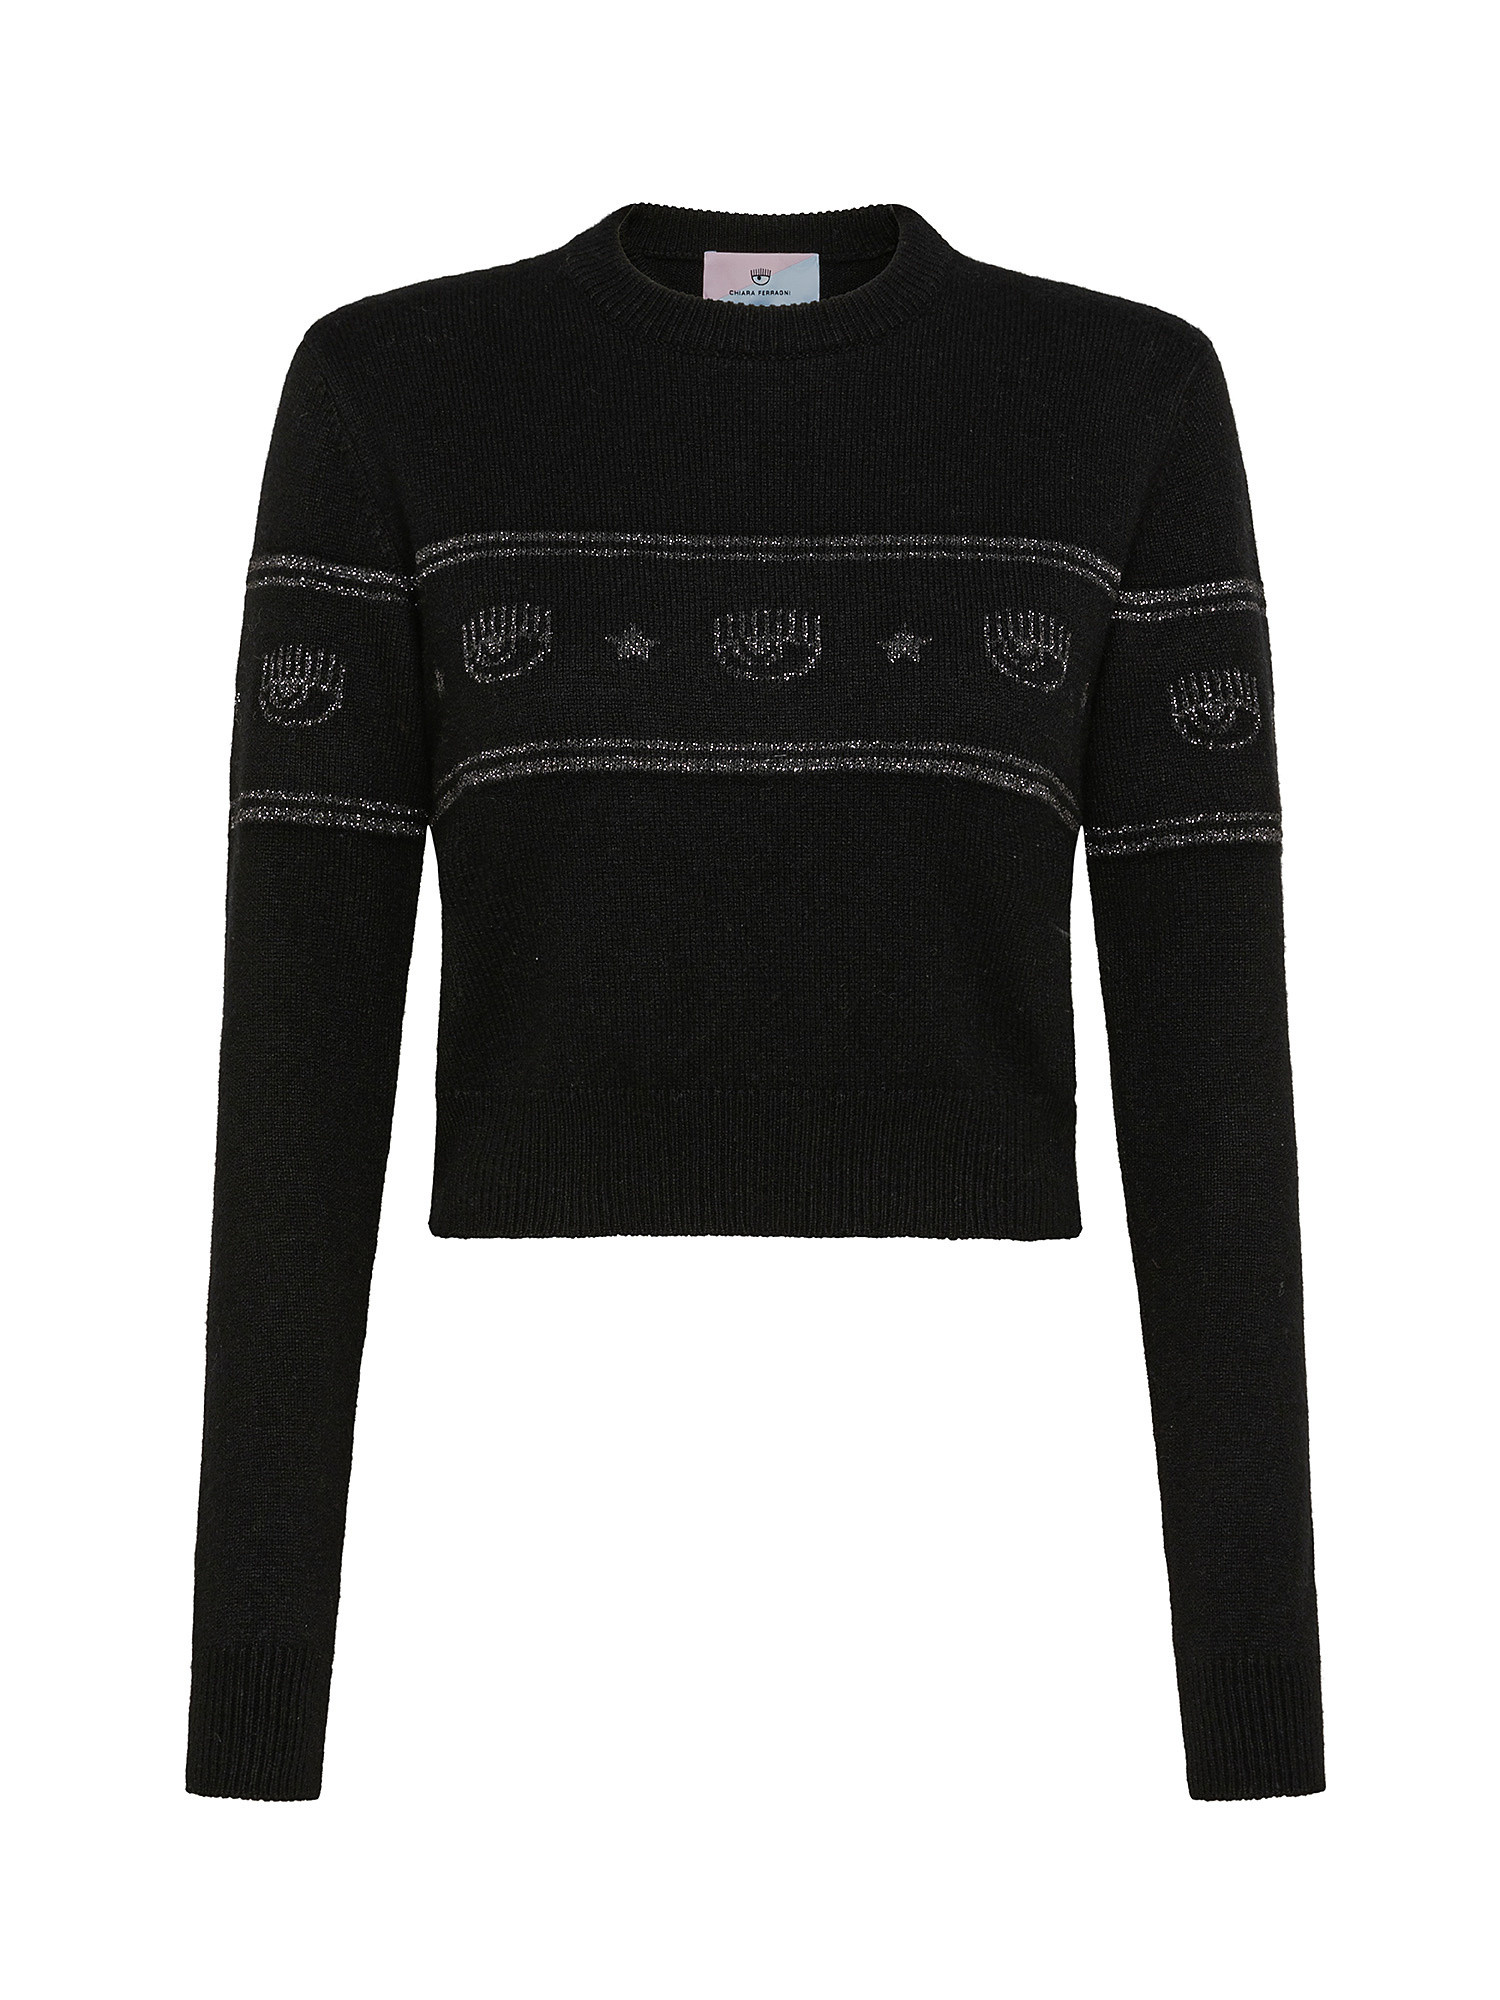 Sweater with logo, Black, large image number 0